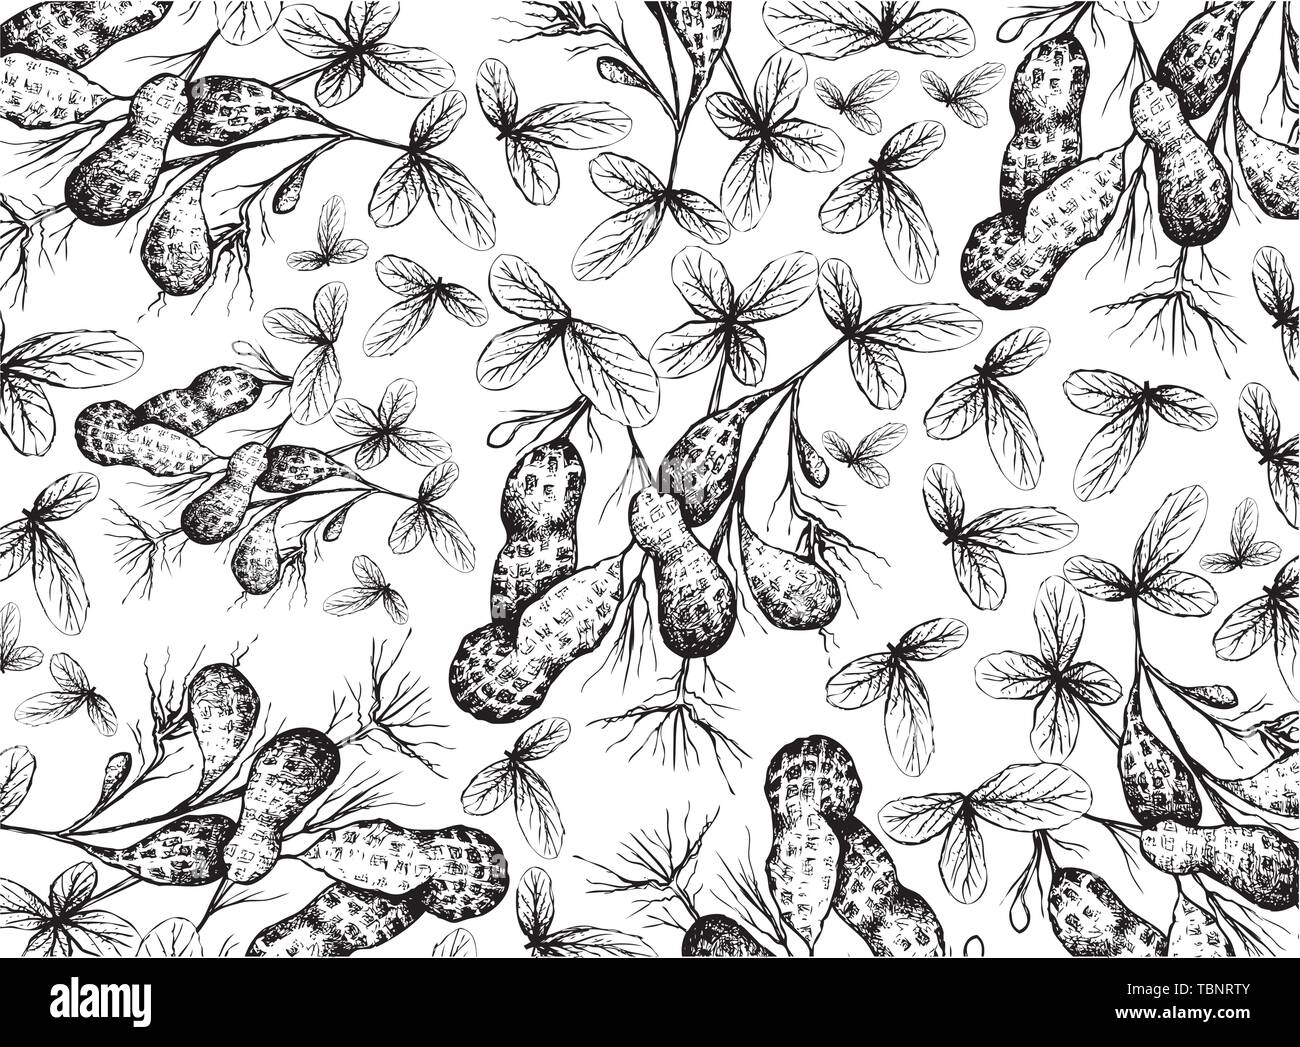 2066 Groundnut Drawing Images Stock Photos  Vectors  Shutterstock